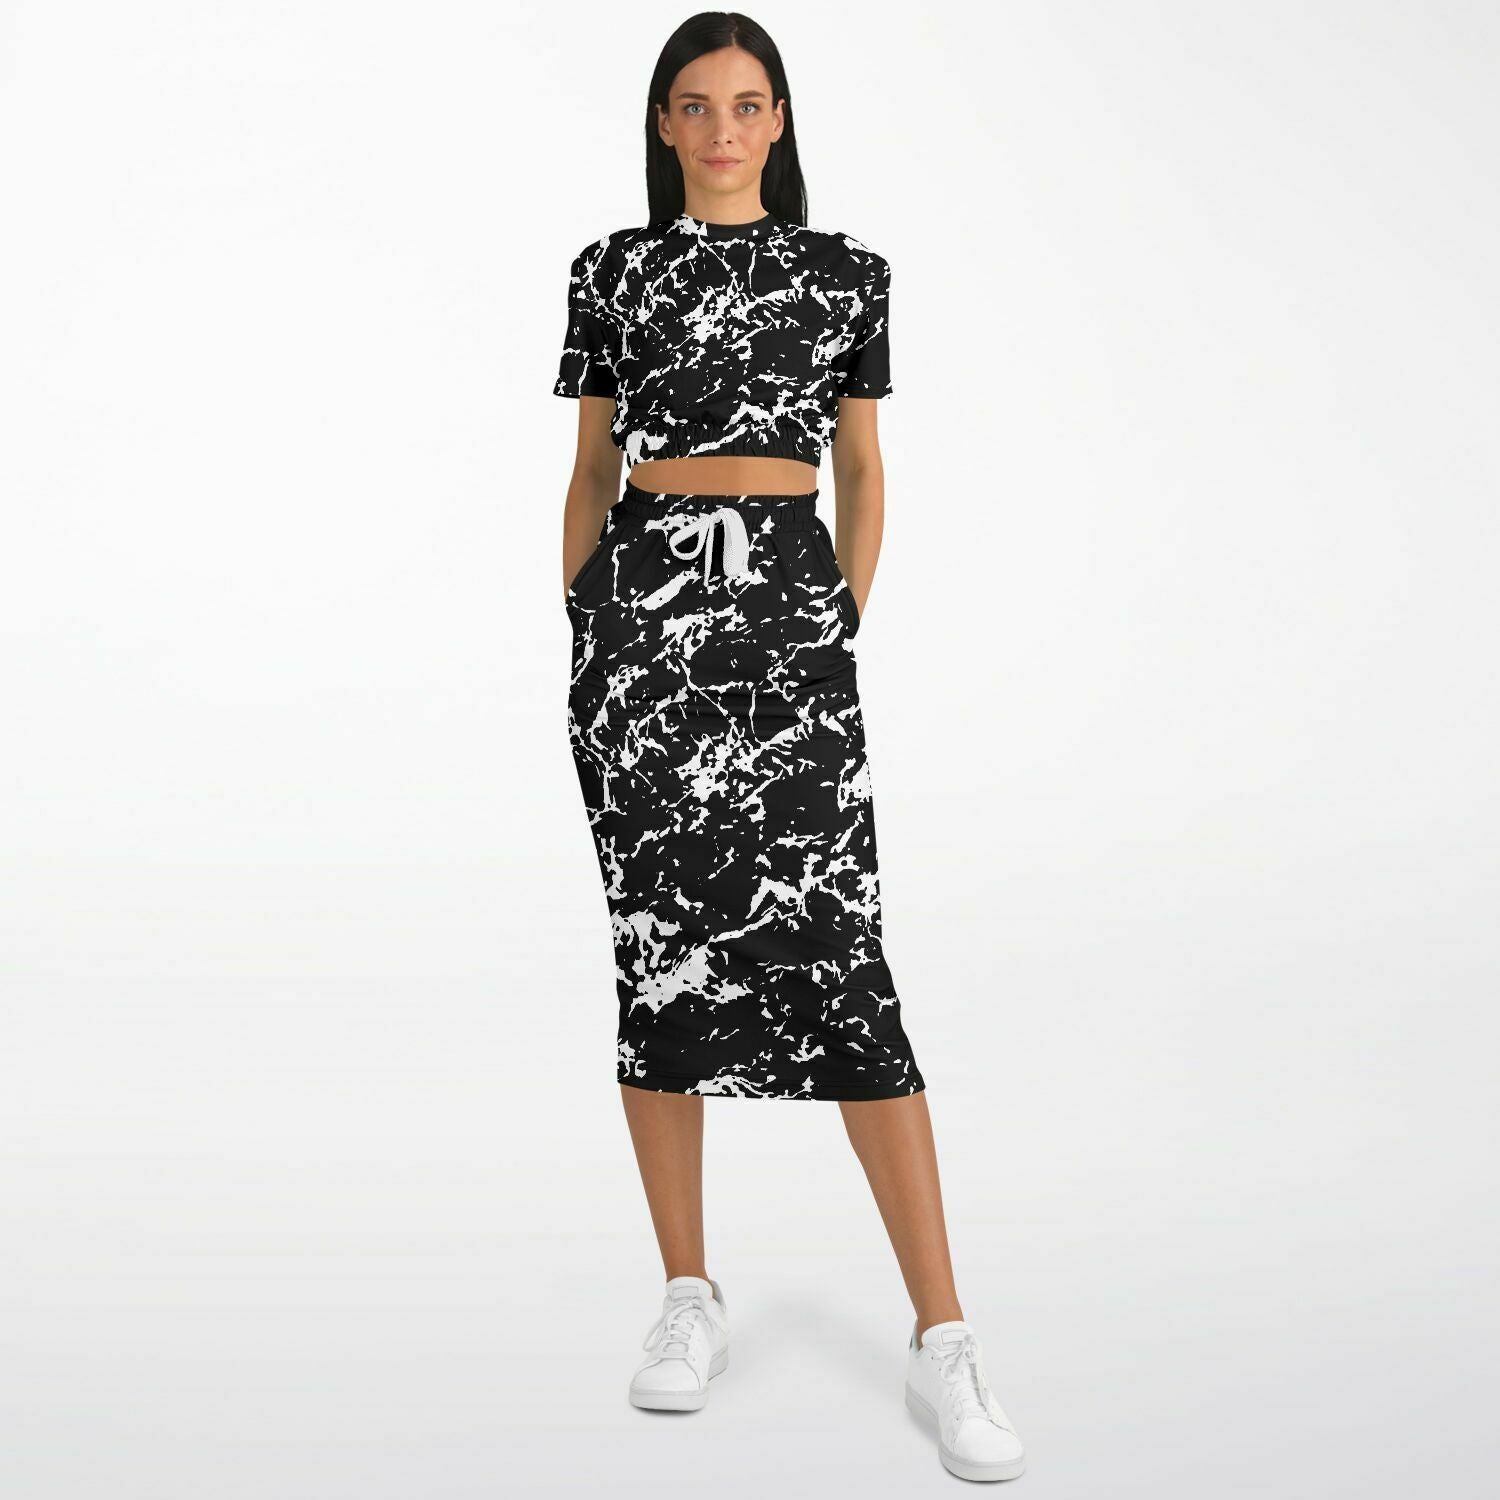 Black Water Camo Short Sleeve Crop Top and Skirt Outfit